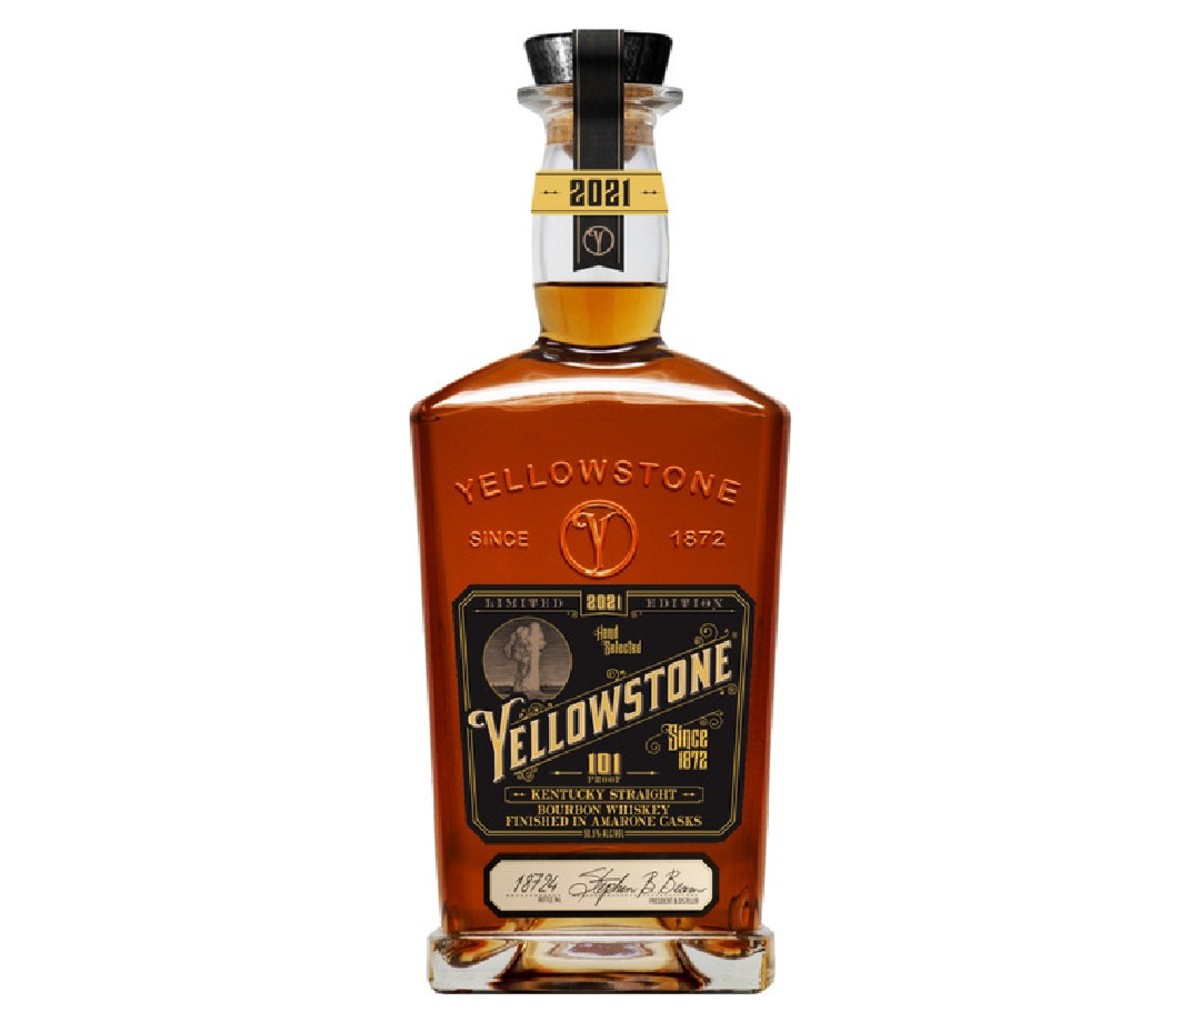 A bottle of Yellowstone Limited Edition bourbon.